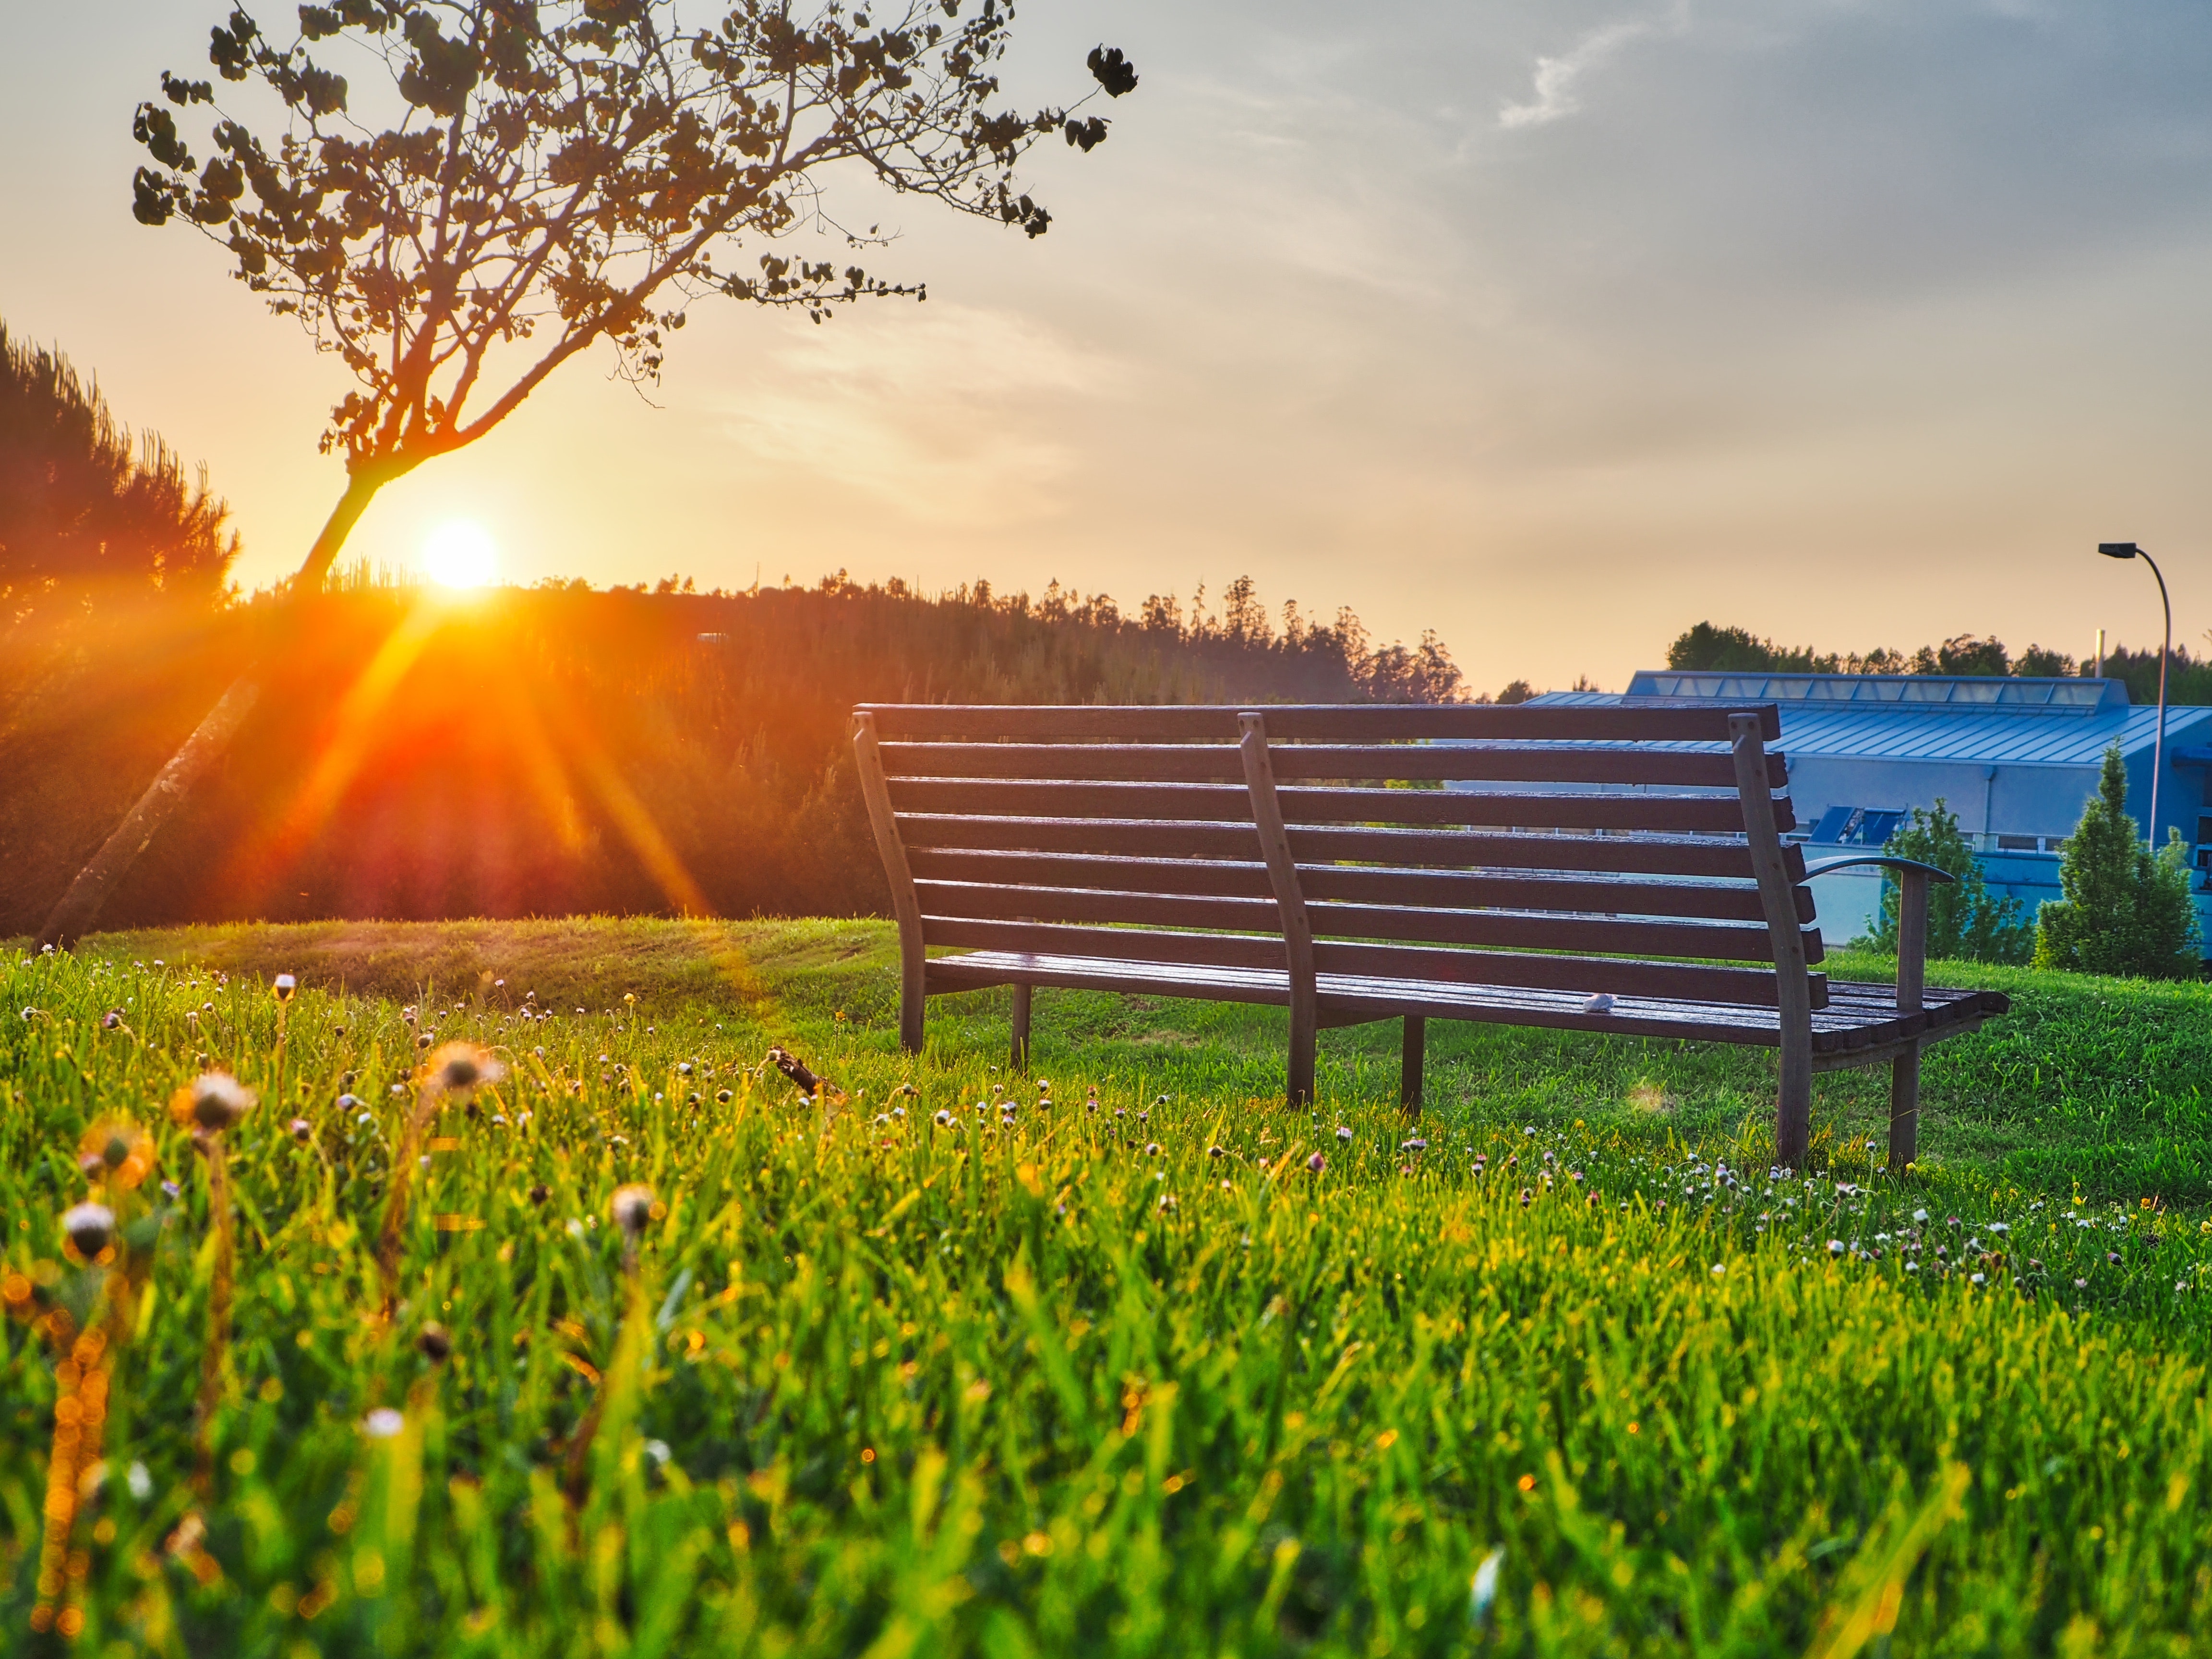 Brown Bench on Green Grass, Bench, Grass, Nature, Outdoors, HQ Photo